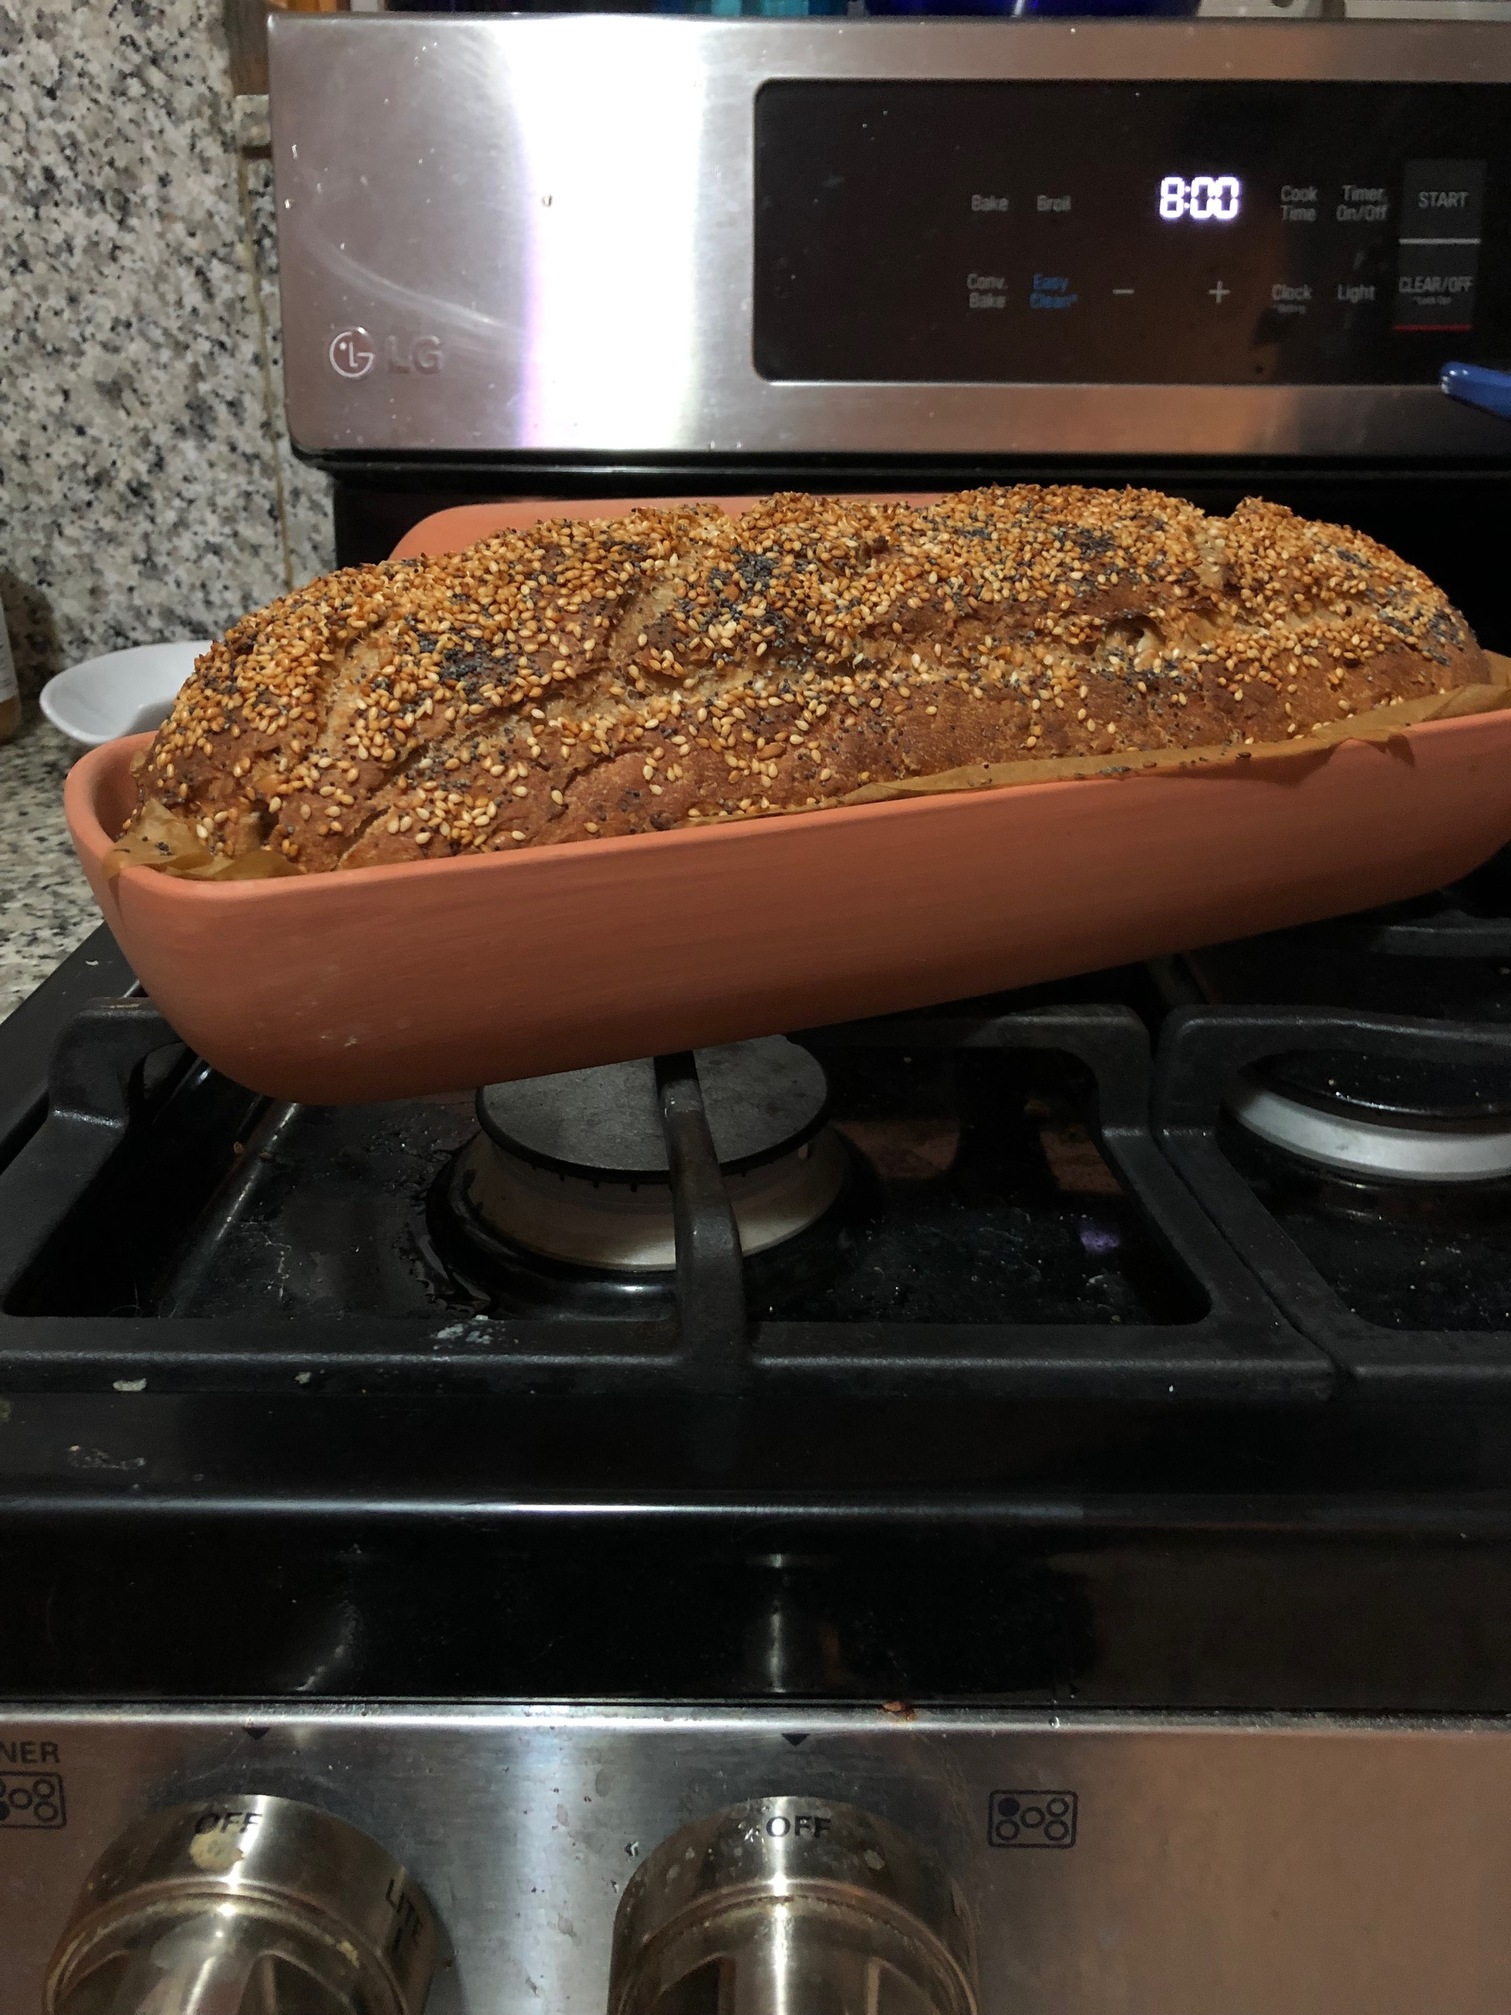 What size dutch oven for baking bread - Baking Tools - Breadtopia Forum